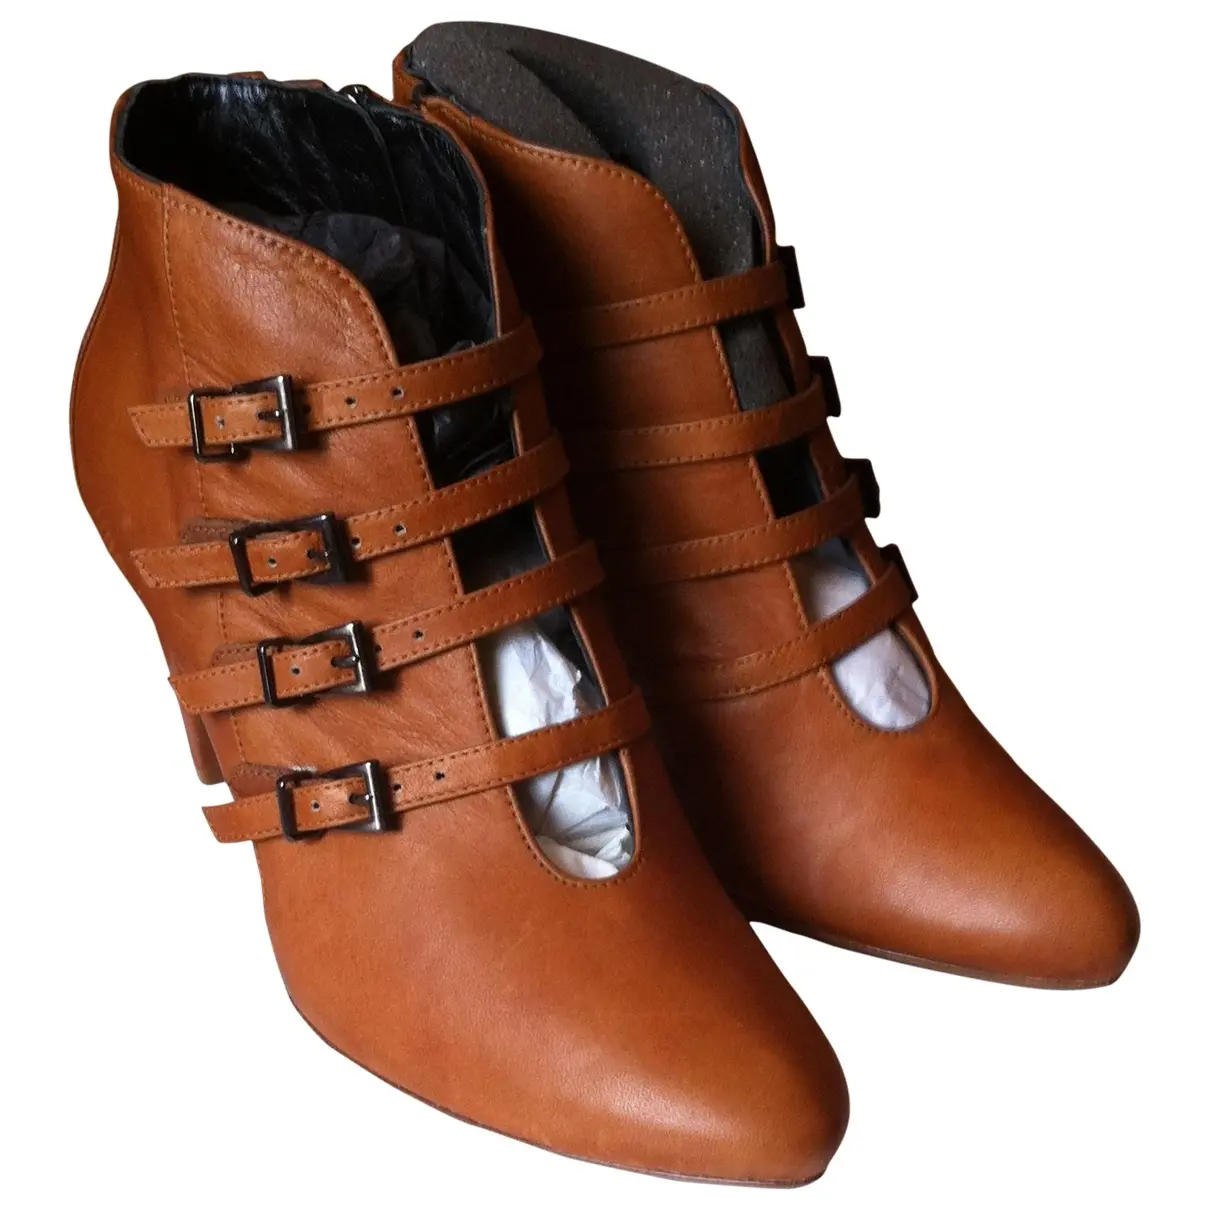 Vanessa Bruno Athe Leather buckled boots for sale